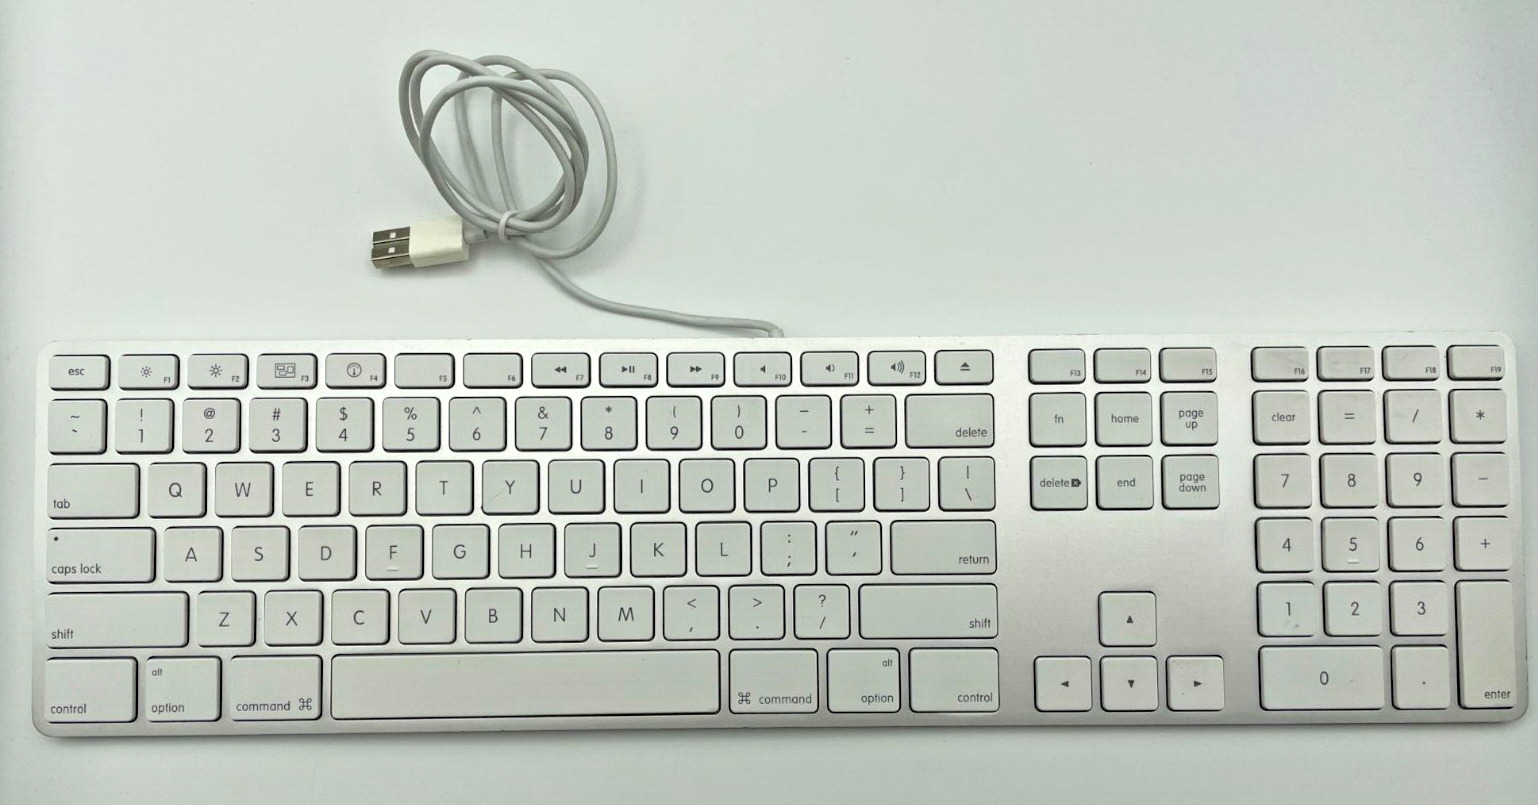 Aluminum USB Wired Keyboard with Numeric Keypad - Good Condition